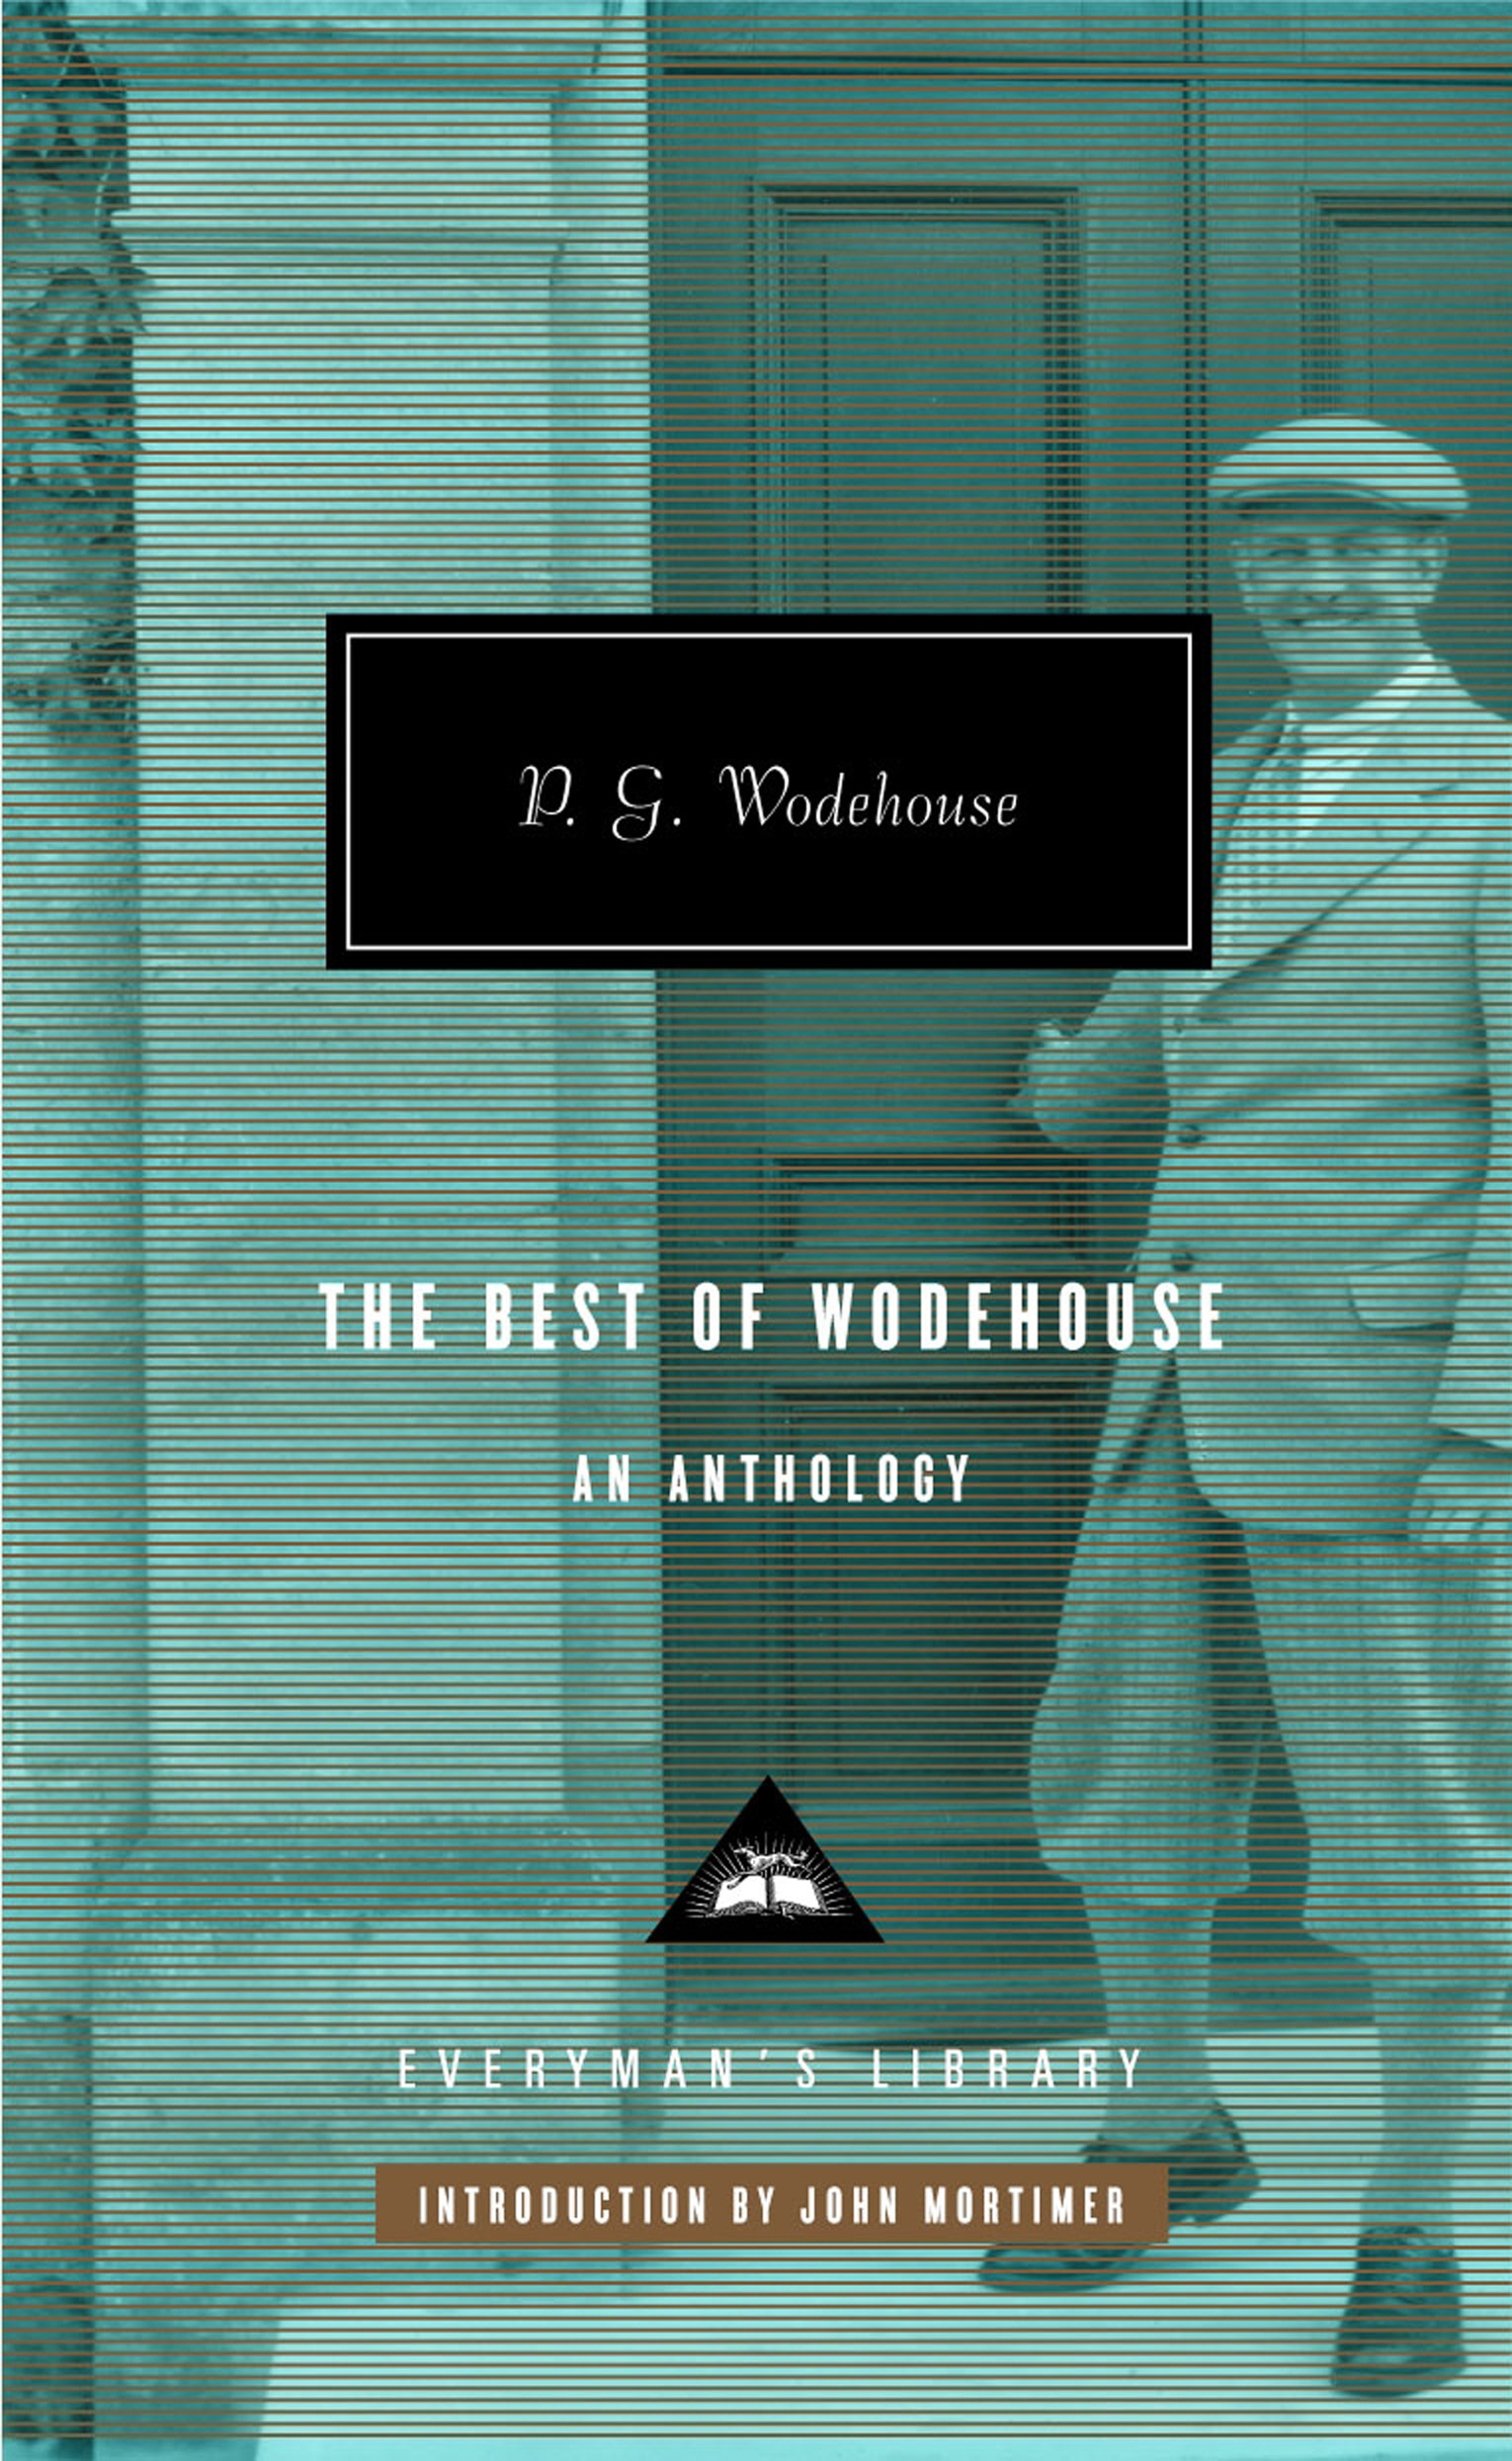 Book “The Best of Wodehouse” by P.G. Wodehouse — June 7, 2007